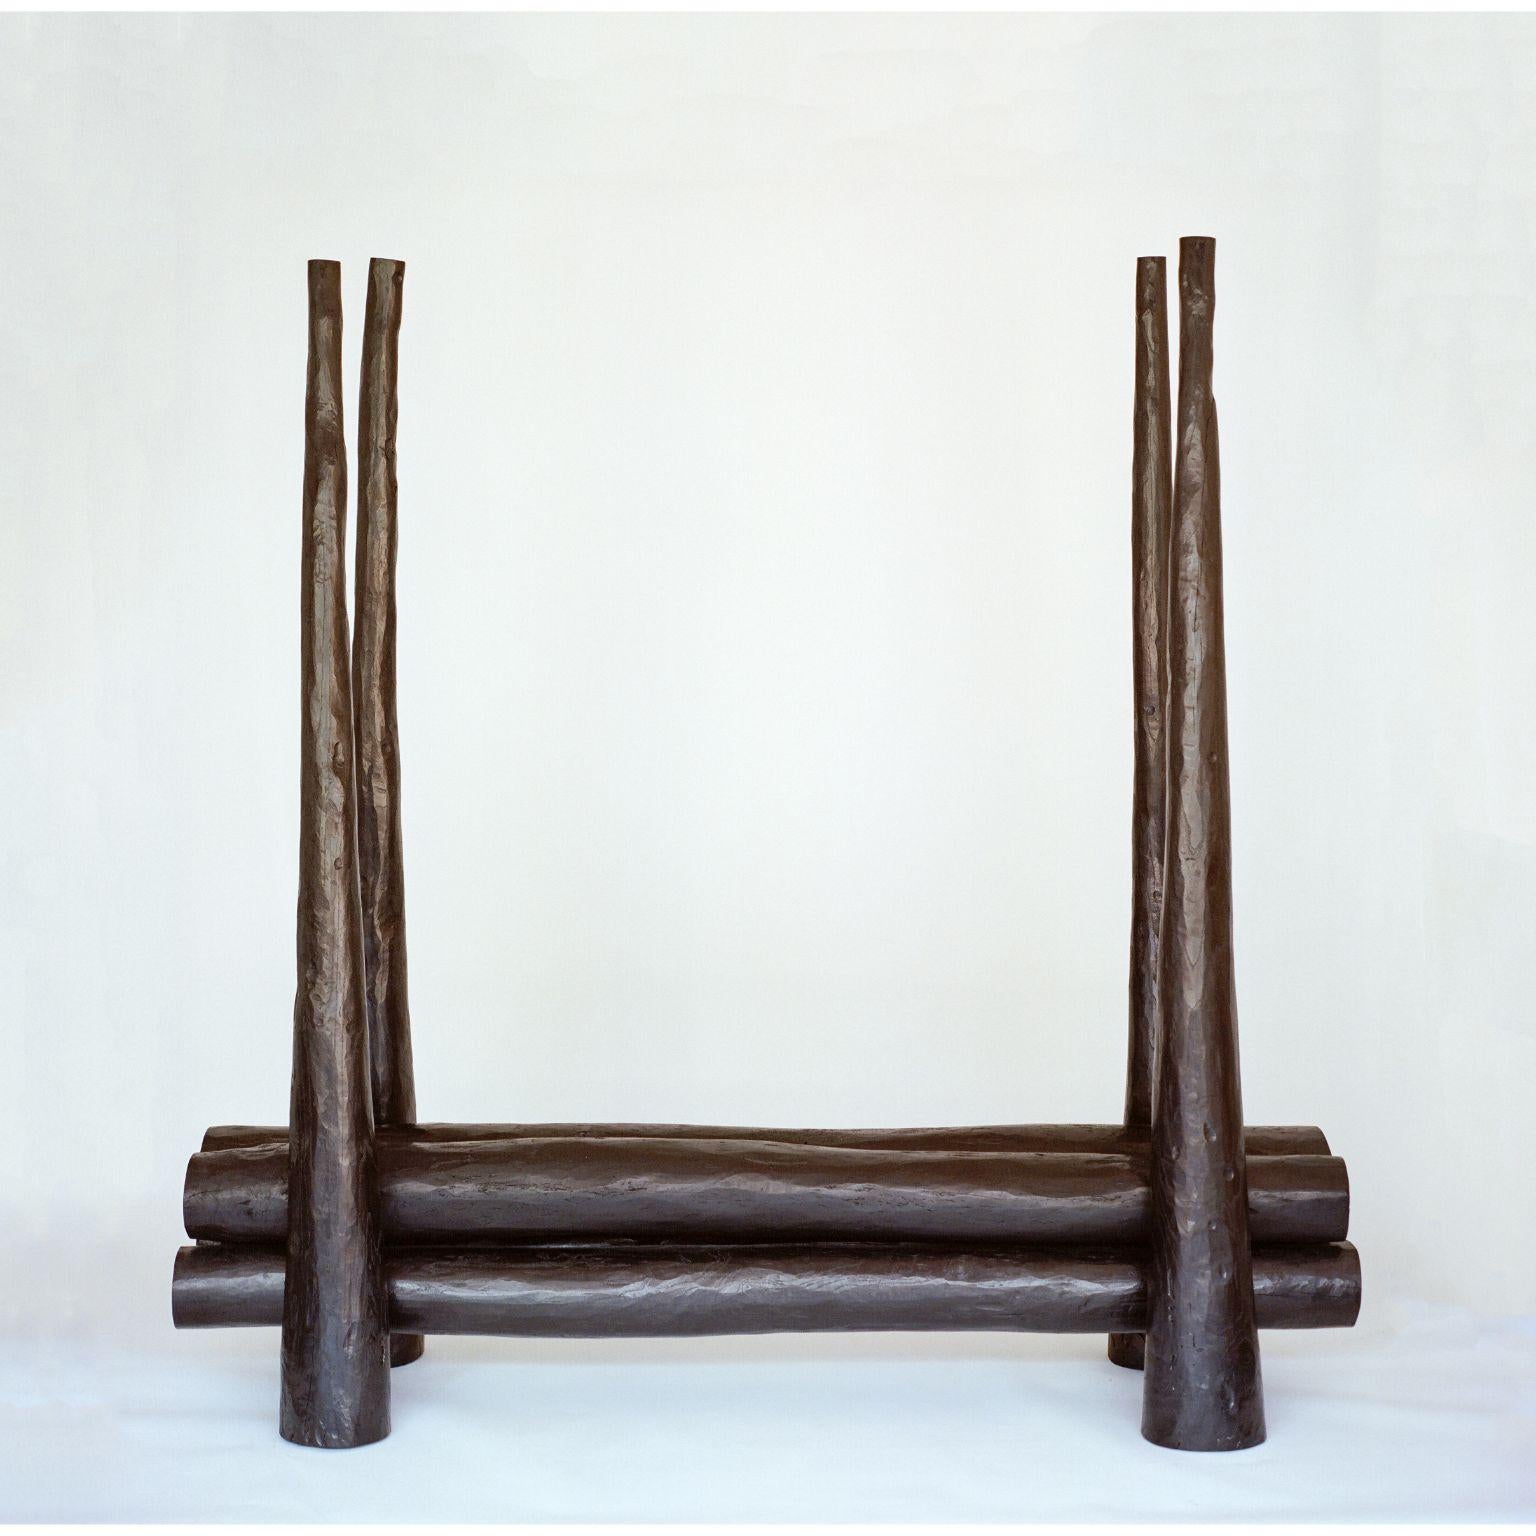 Handmade Bench #1 by Henry D'ath
Dimensions:D200 x W60 x H195 cm
Materials:Wood, Steel, Calligraphy Ink

Piece is handmade by artist.

Henry d’ath is a new zealand born, hong kong based artist and architect. 
Using predominantly salvaged